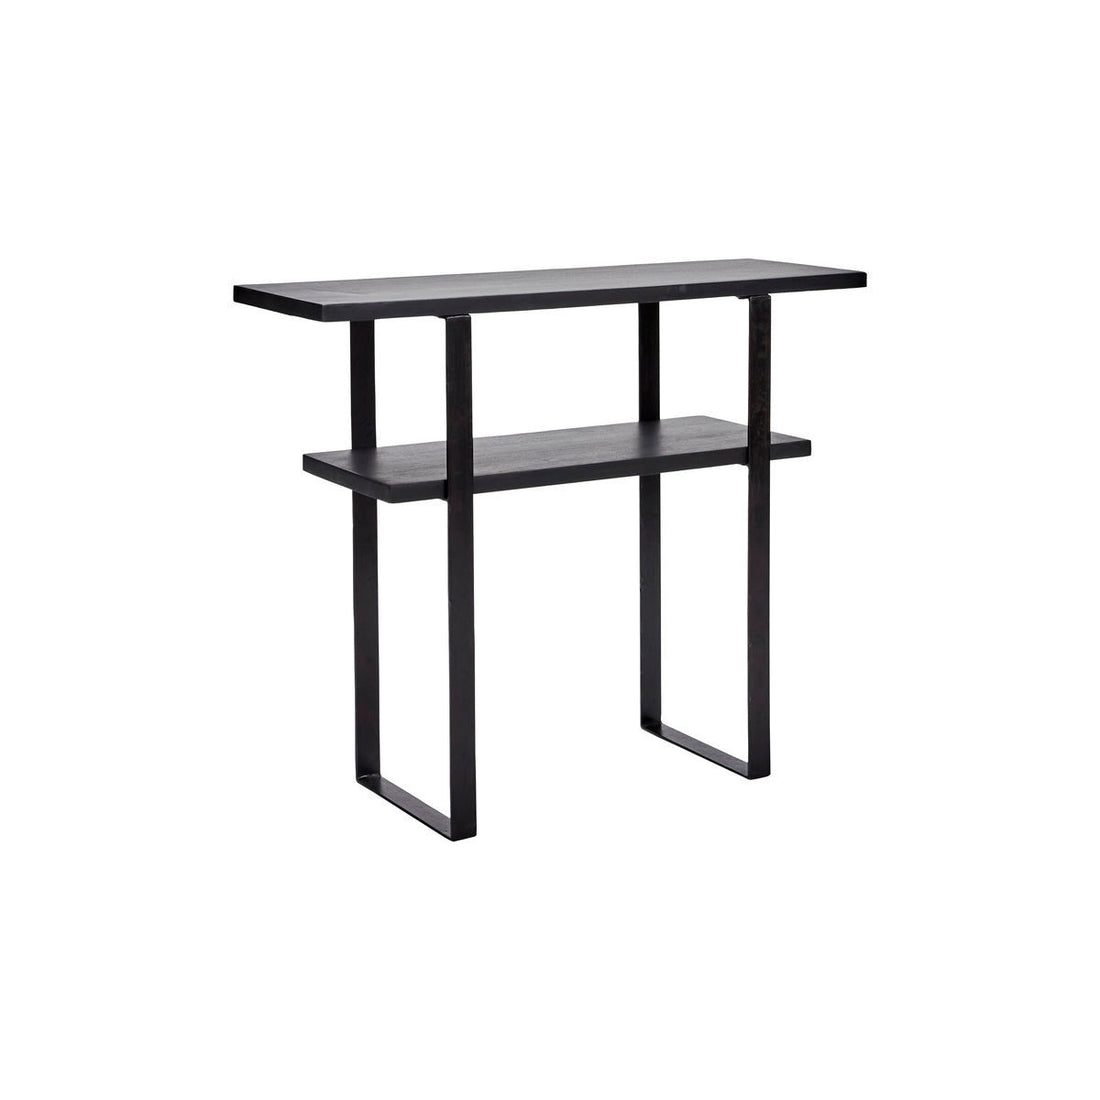 House Doctor Console Table, Woda, Black